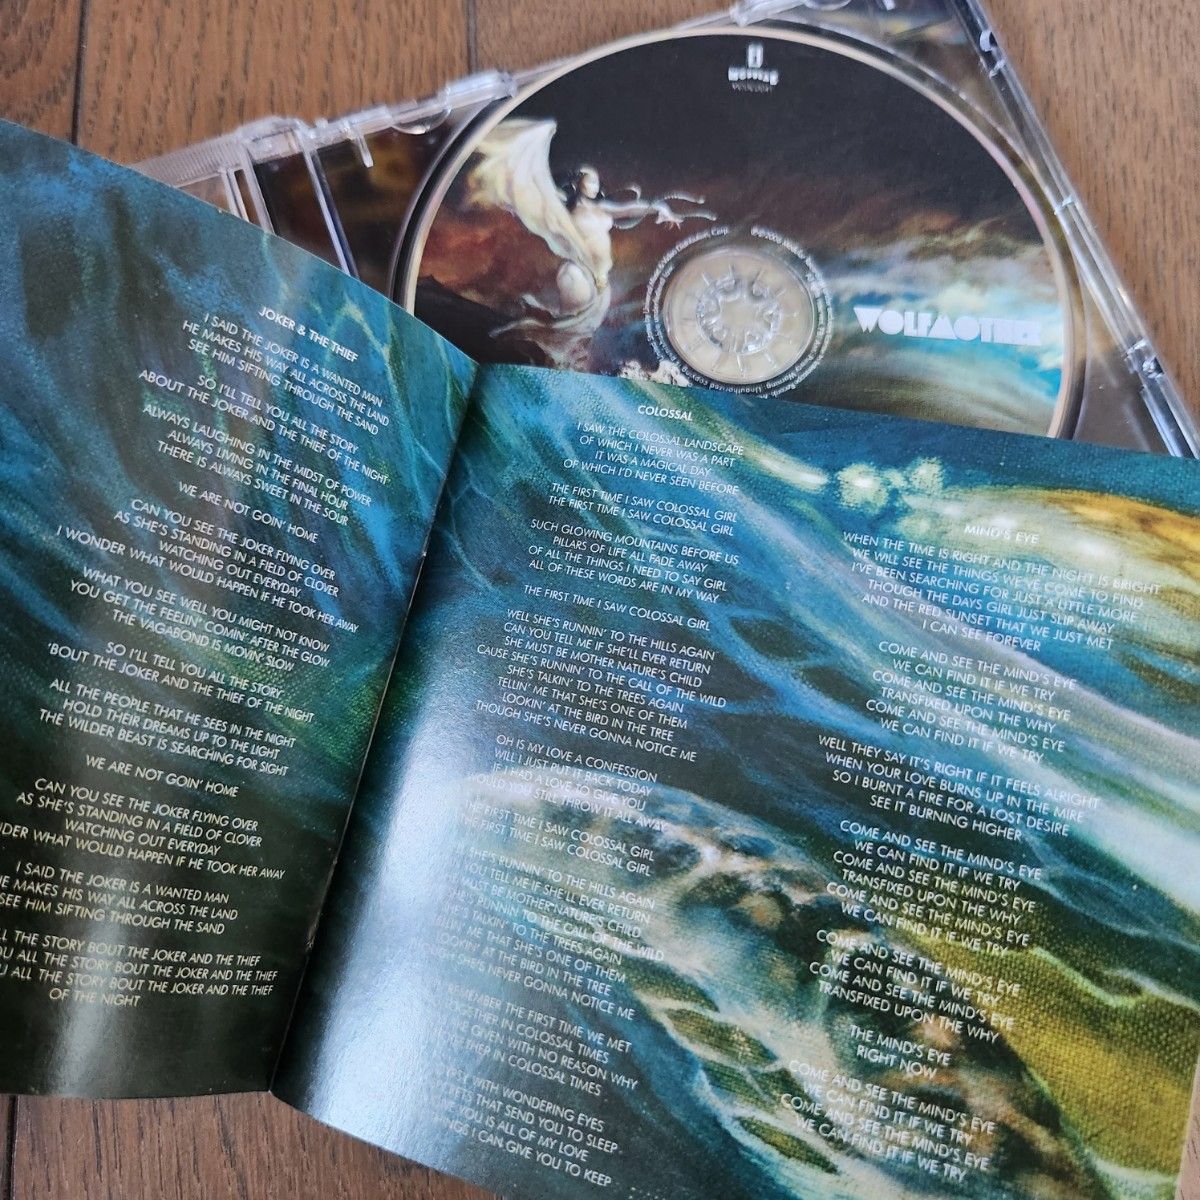 ★WOLFMOTHER「WOLFMOTHER」アルバム！輸入盤　全13曲収録(歌詞付き)3人組みバンドのデビュー作。